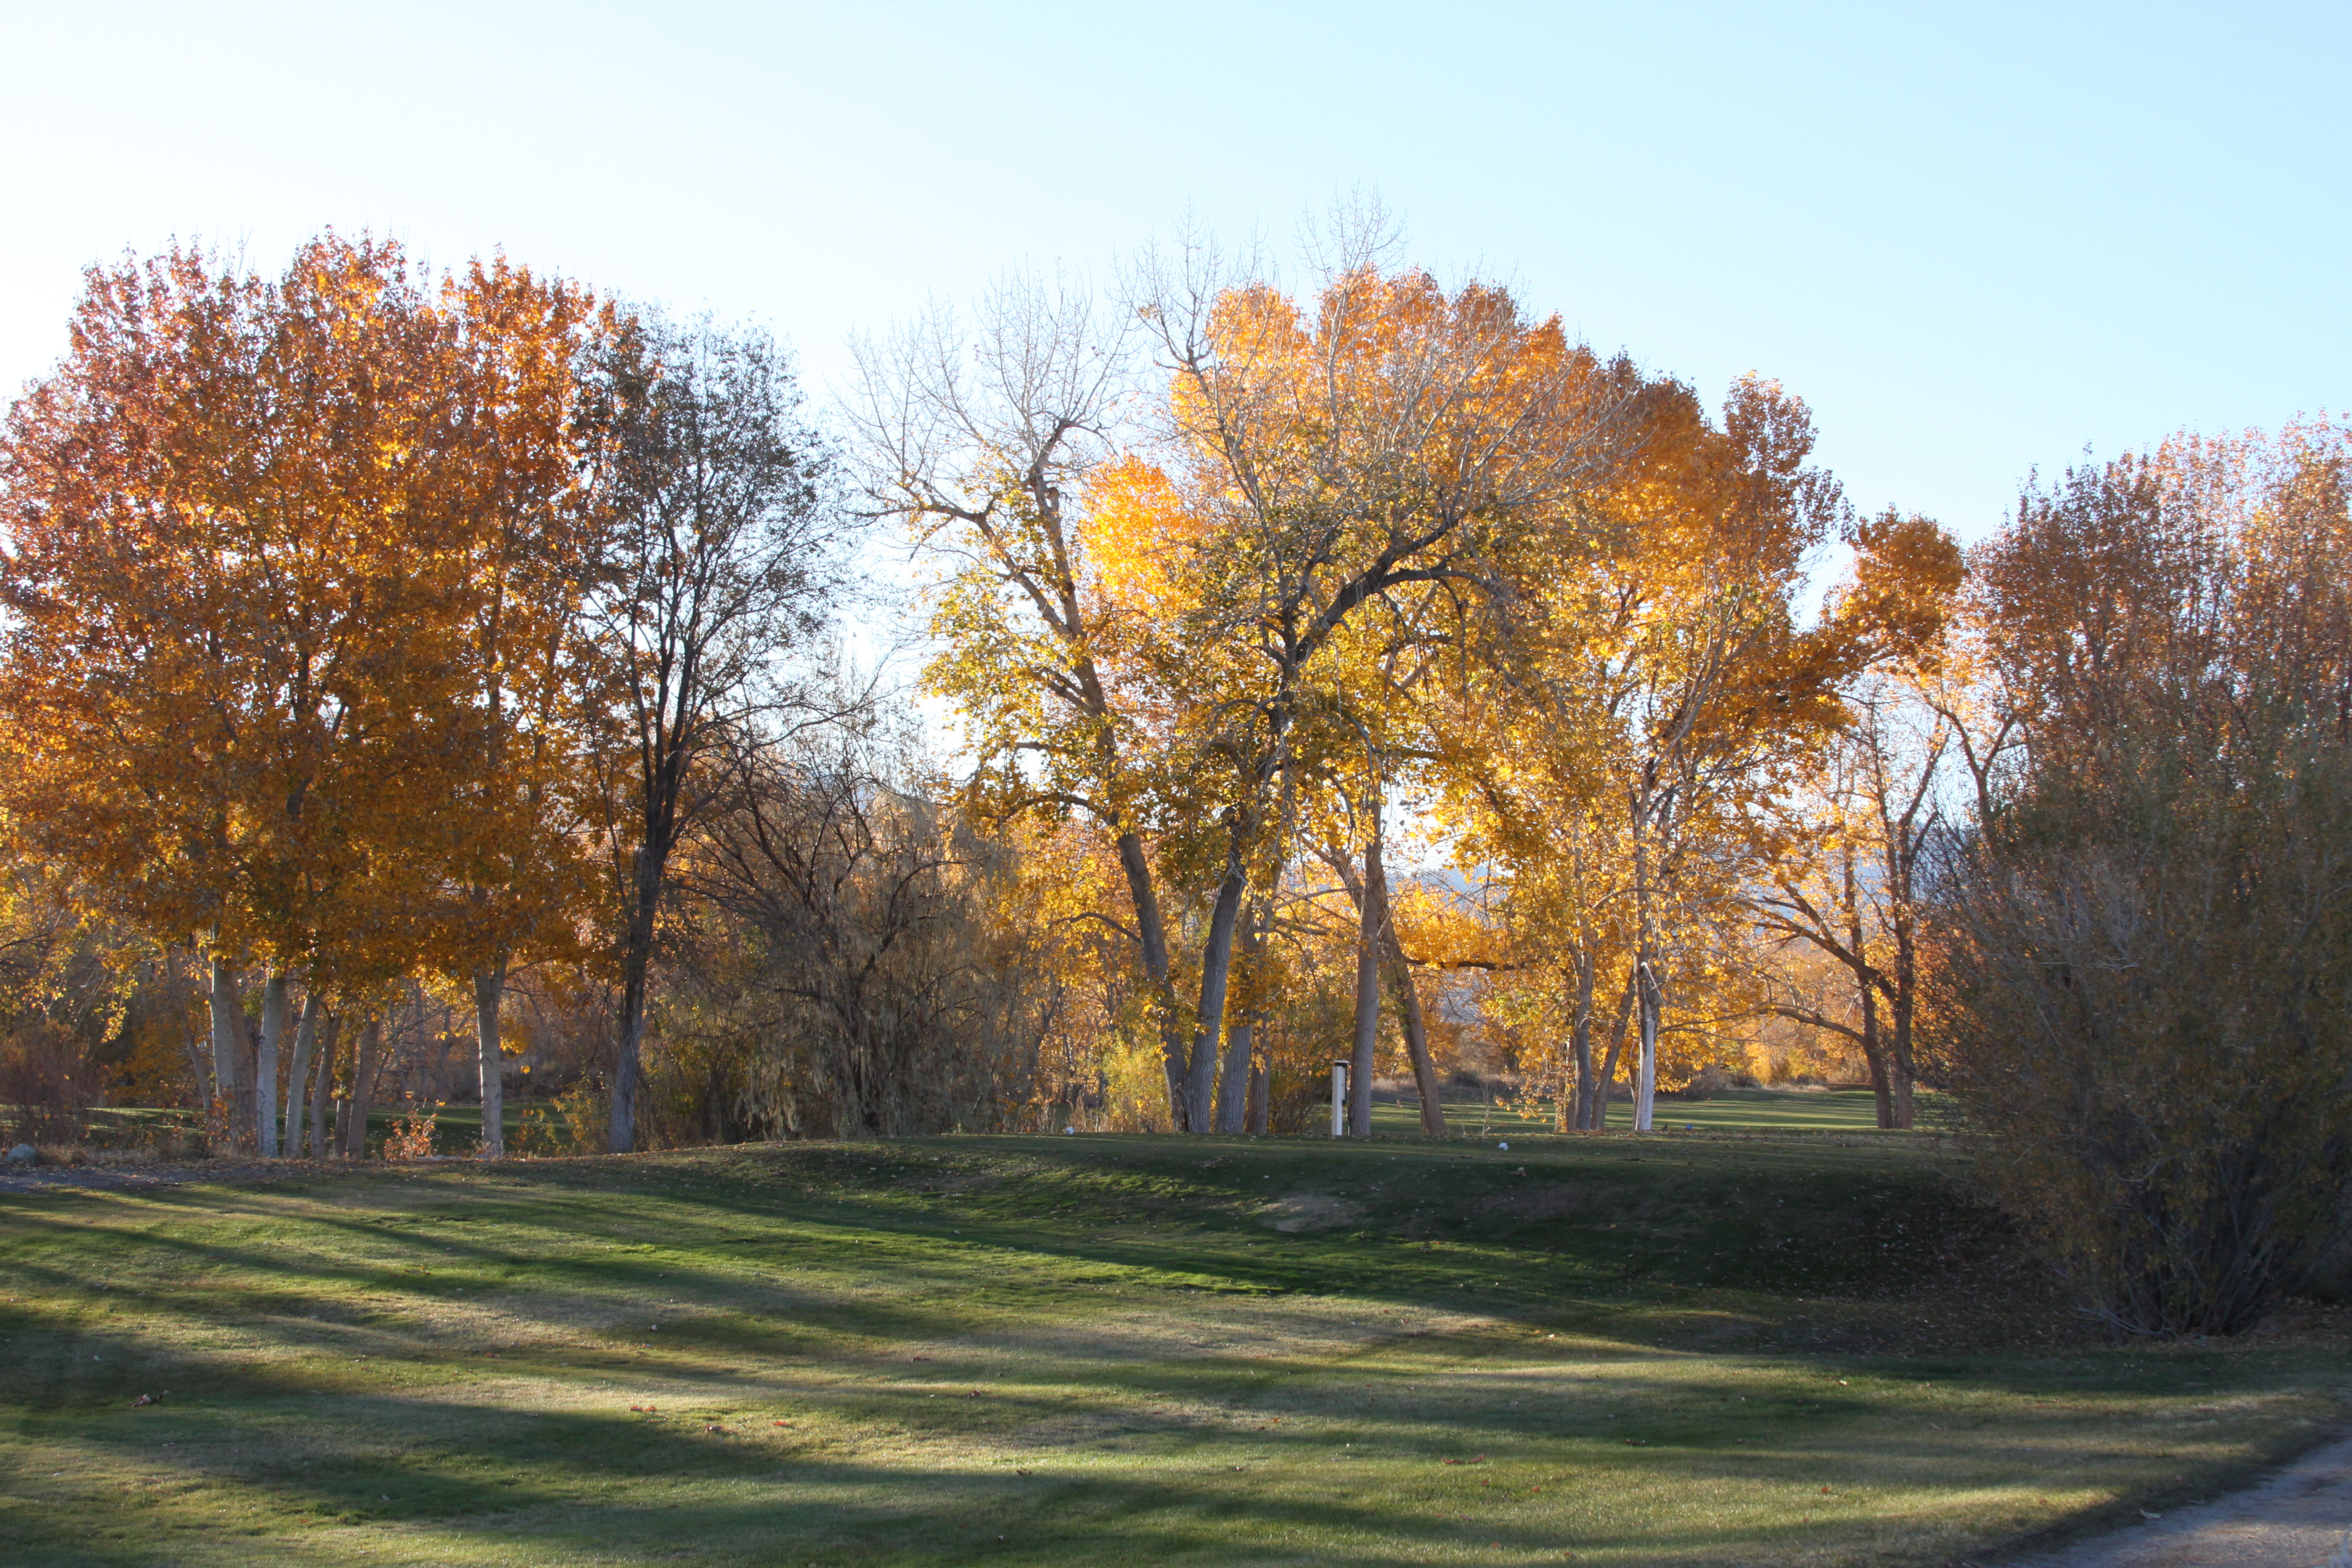 Carson Vally yGolf Course and Fall colors on the trees